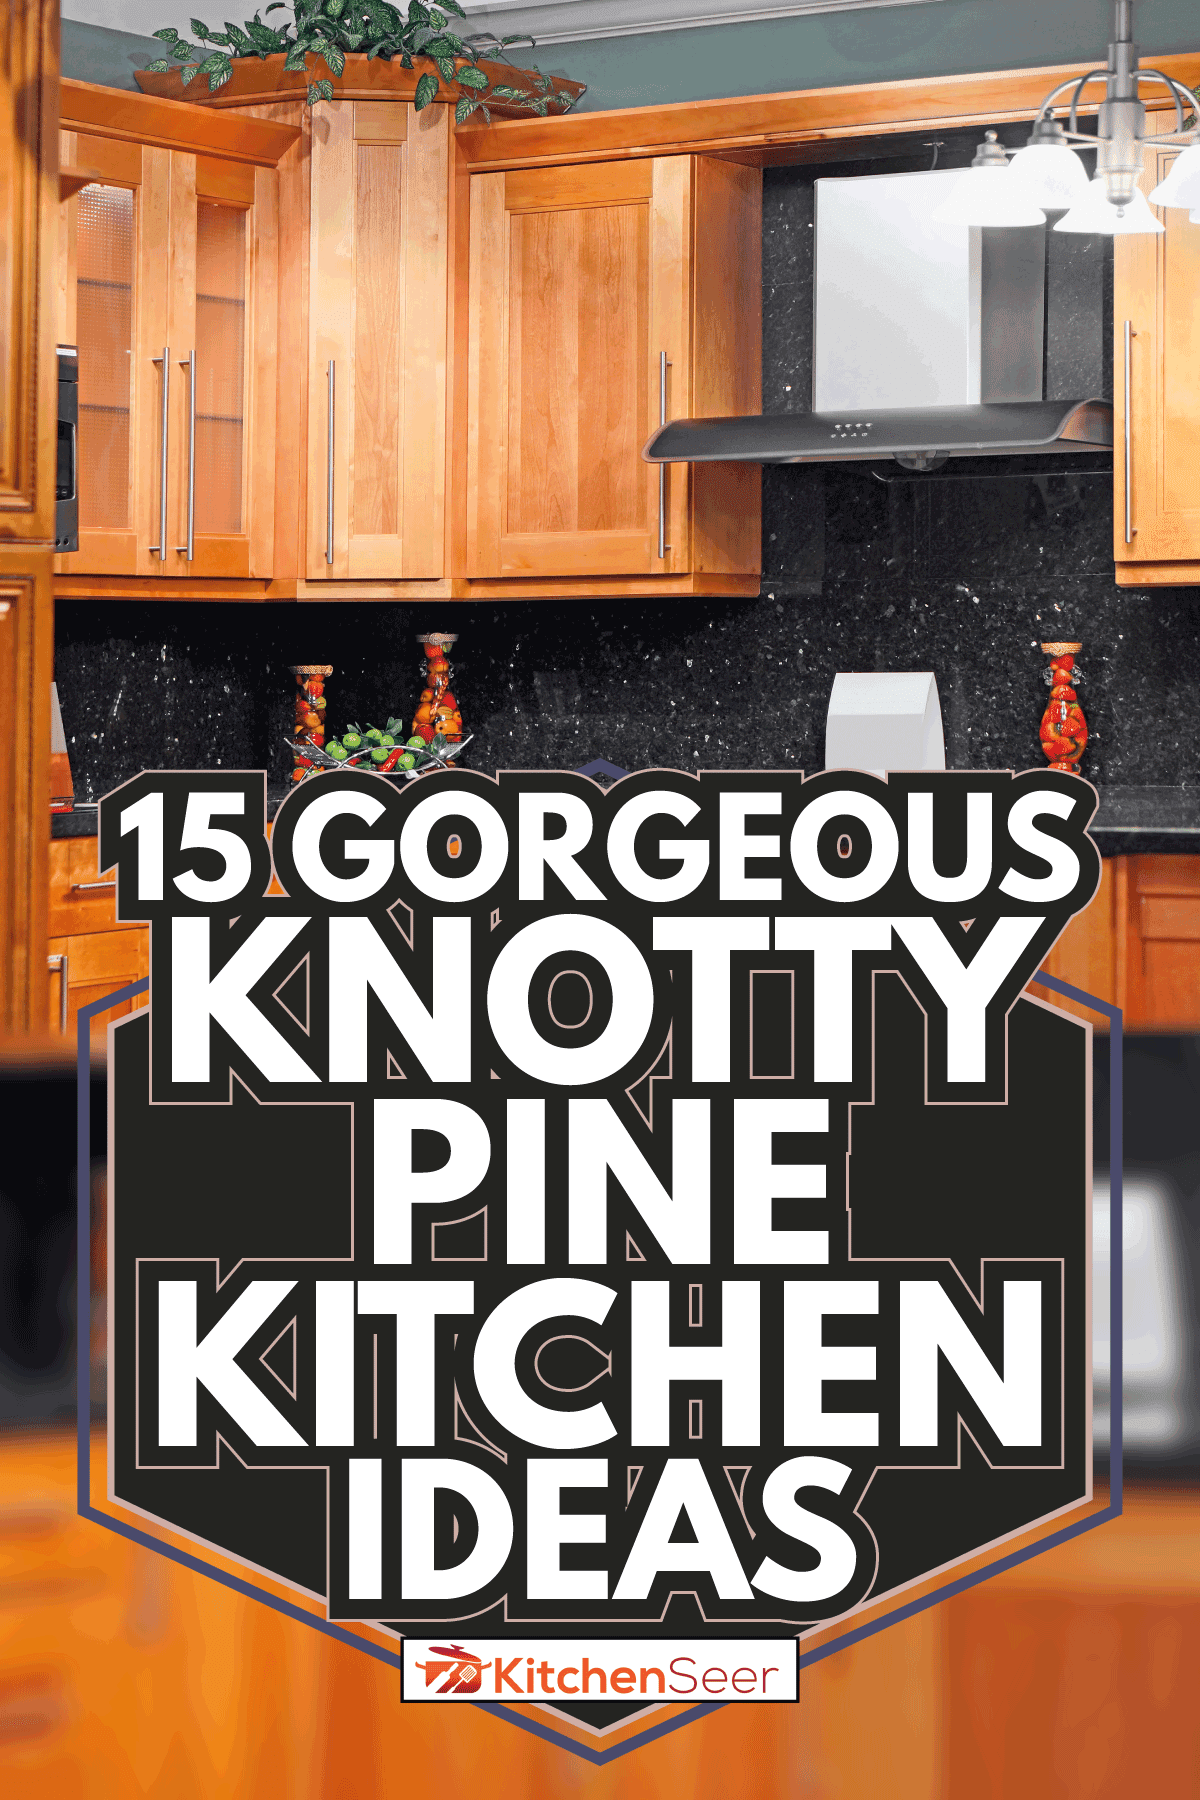 knotty pine wood cabinet in the kitchen. 15 Gorgeous Knotty Pine Kitchen Ideas